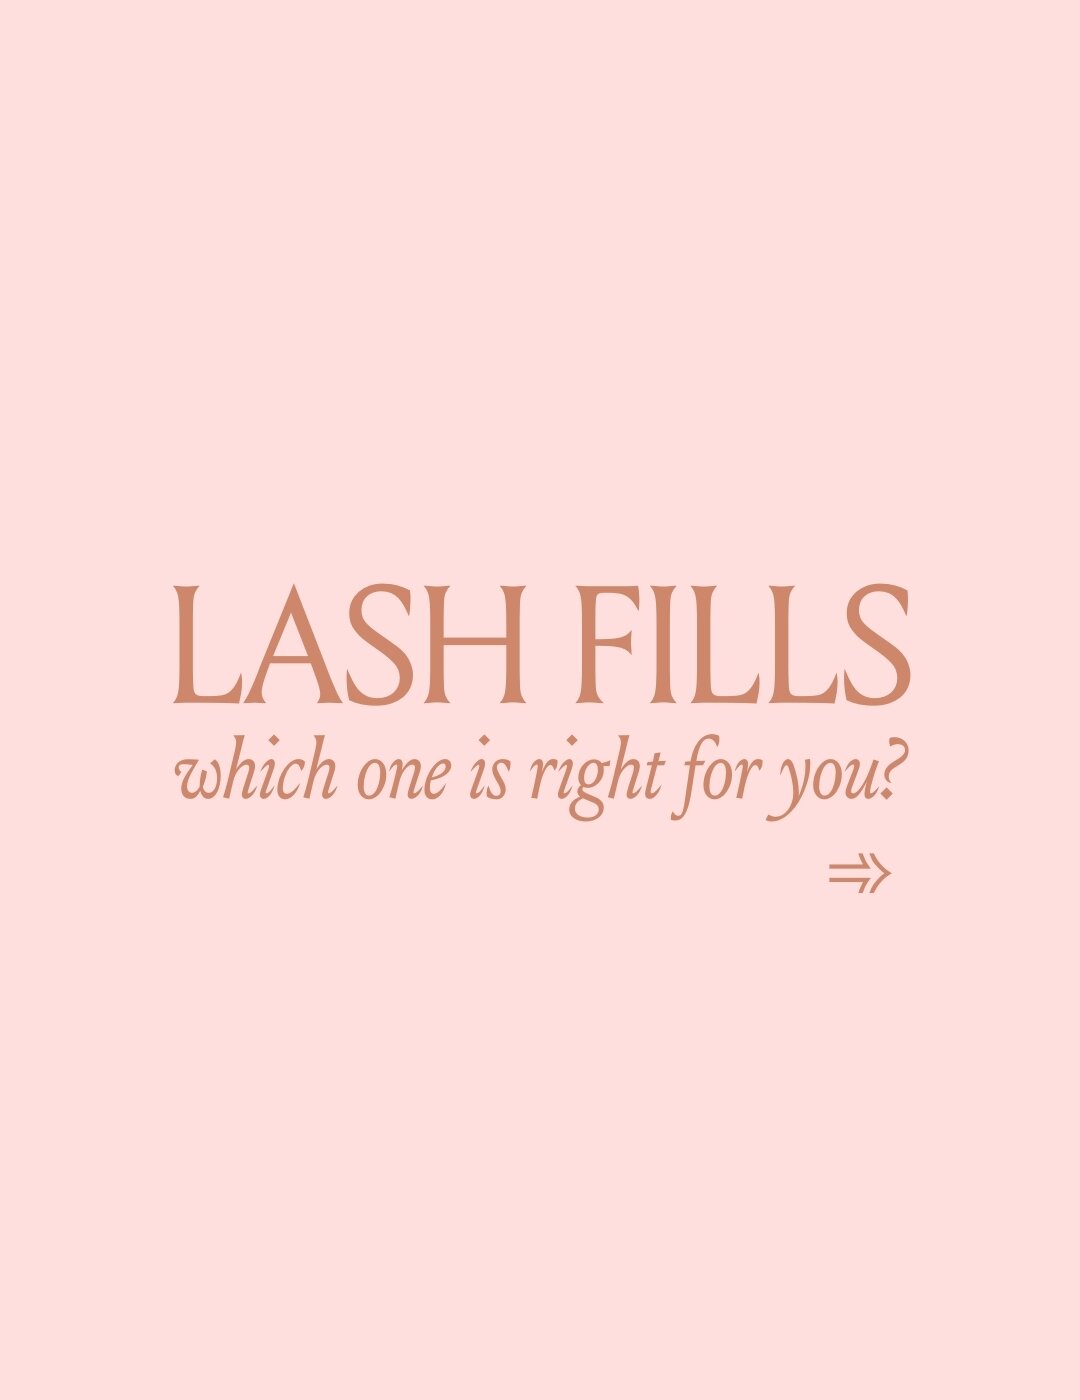 If you've ever been unsure which fill to book, this is the post for you!! Booking the correct fill is the best way to ensure your lashes are always looking their best 🤍